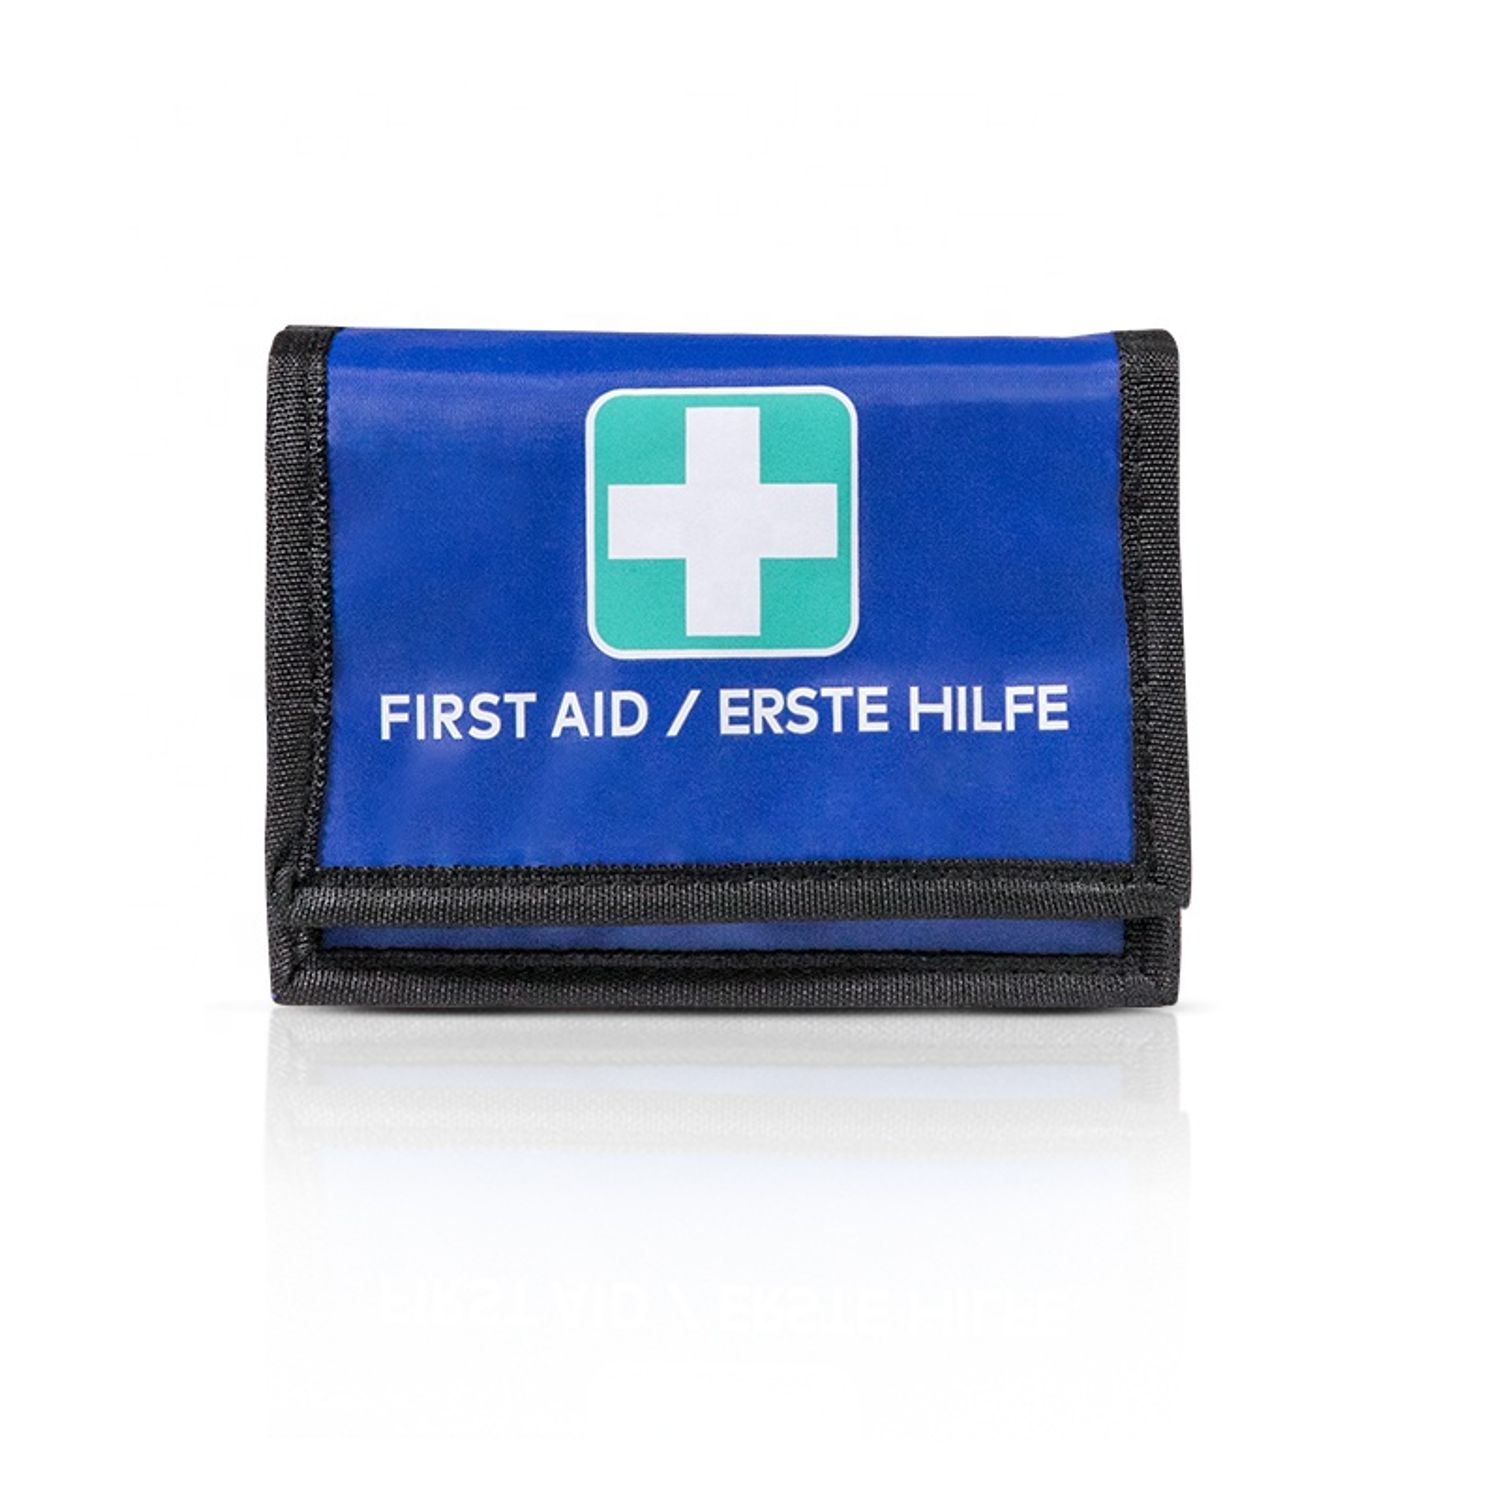 show of Pocket-Sized First Aid Kit for Emergencies at Home or Outdoors
